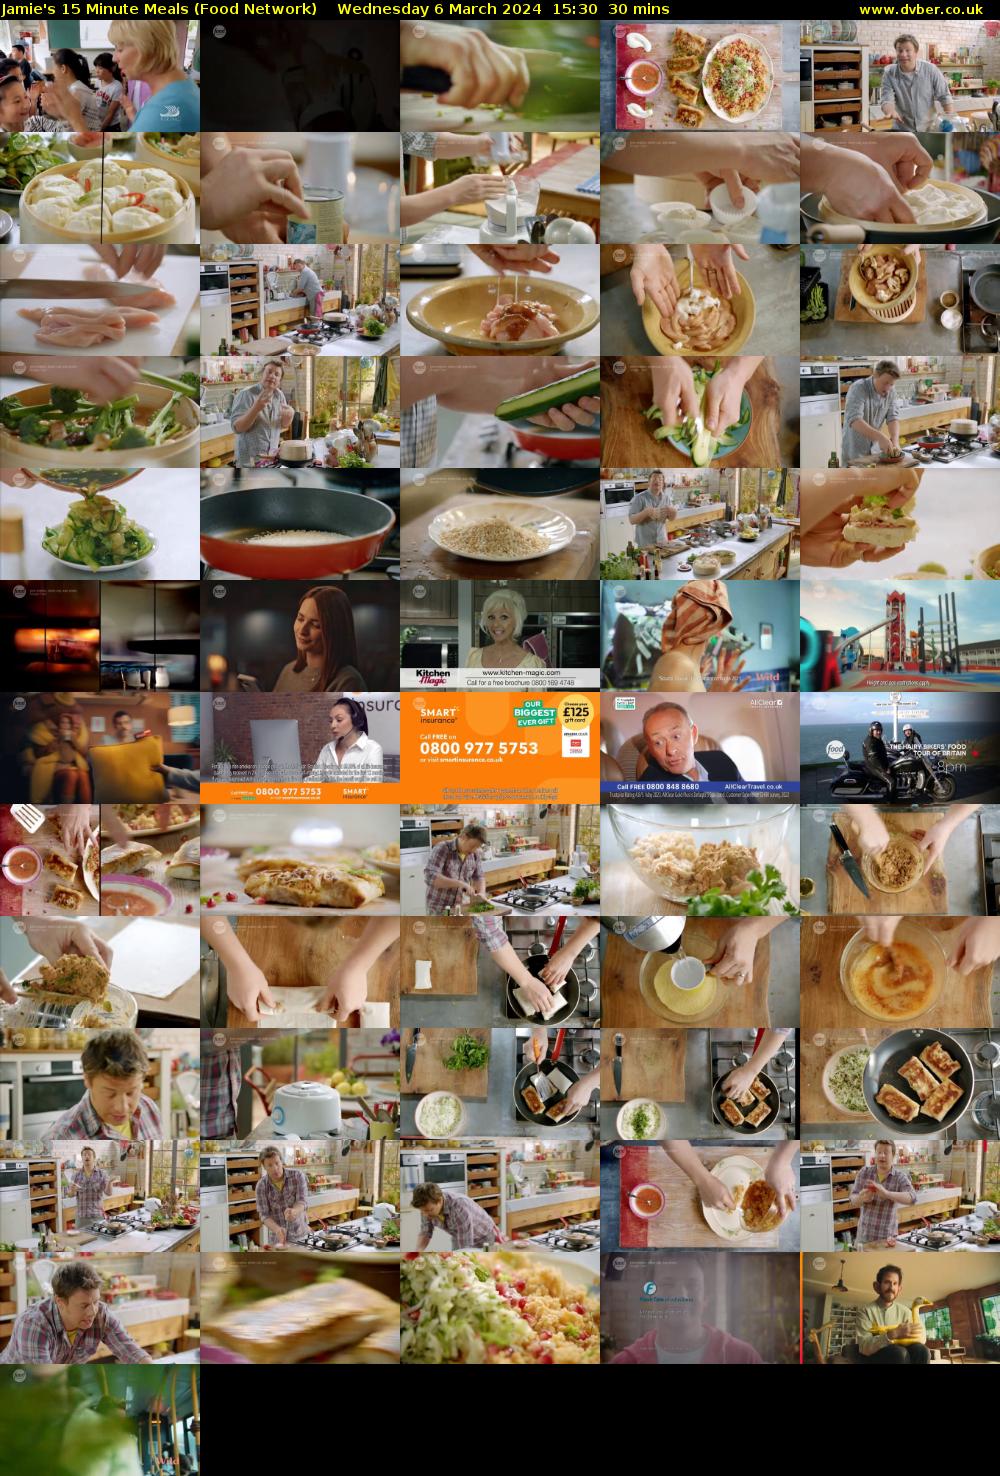 Jamie's 15 Minute Meals (Food Network) Wednesday 6 March 2024 15:30 - 16:00